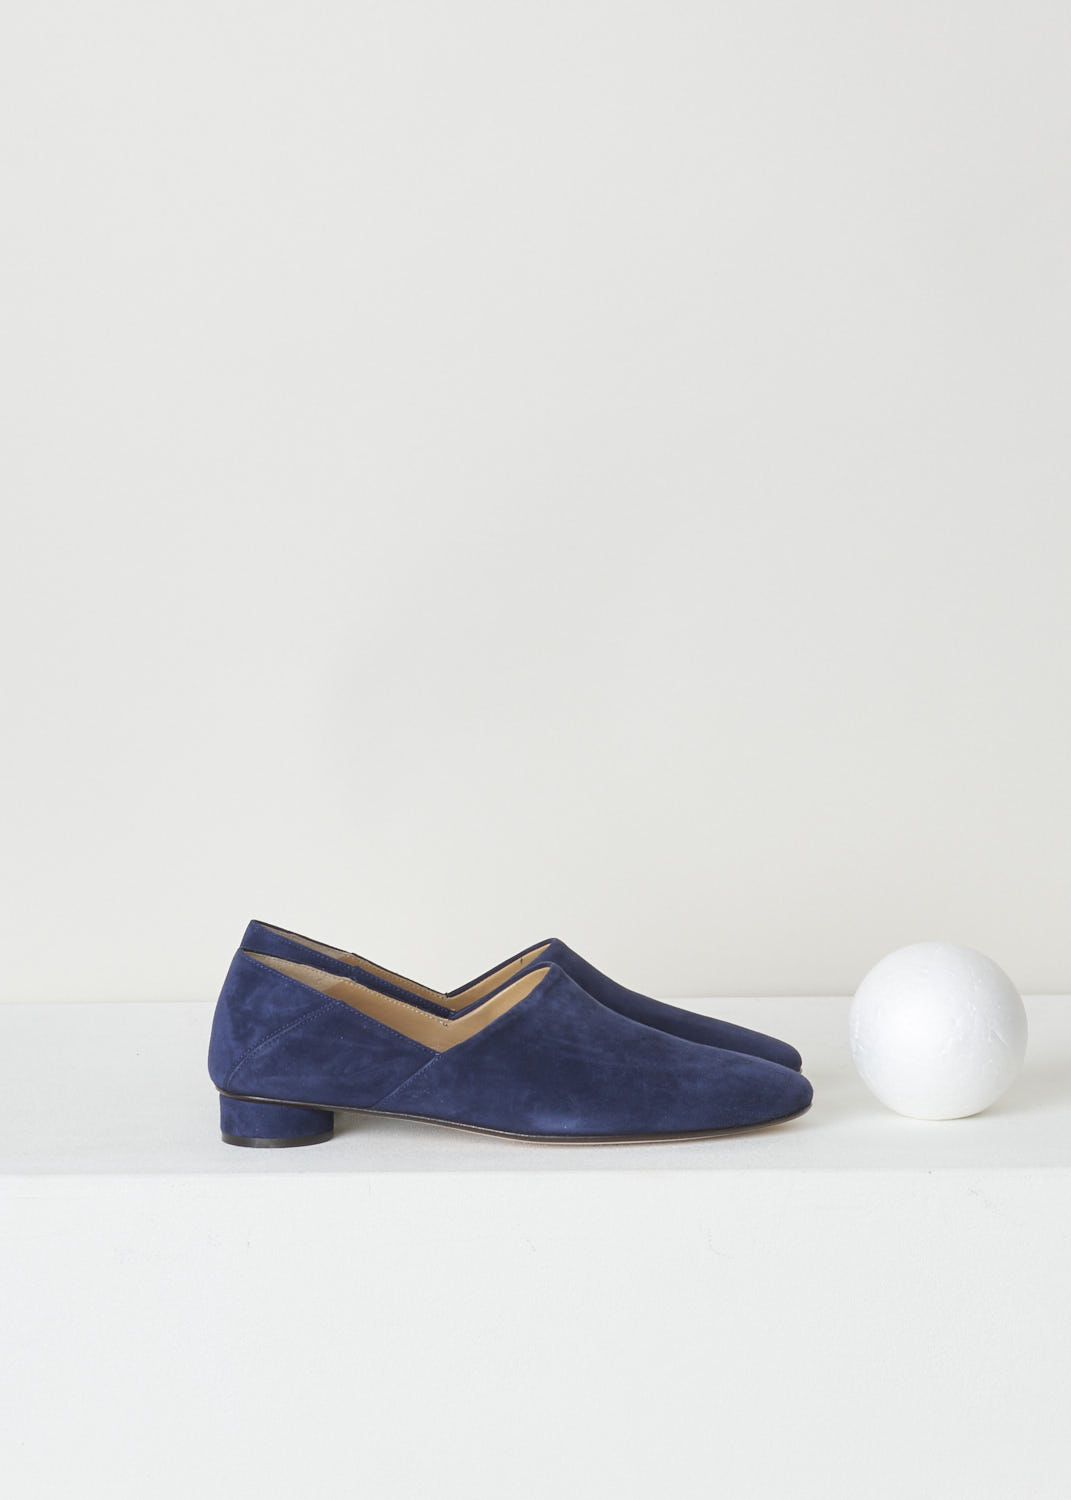 THE ROW, NAVY BLUE SUEDE SLIPPER, NOELLE_F1000_L25_NVY, Blue, side, Minimalistic navy blue suede slipper. The slip-in model features a rounded toe vamp. The sober design is exactly what makes these shoes so beautiful.
